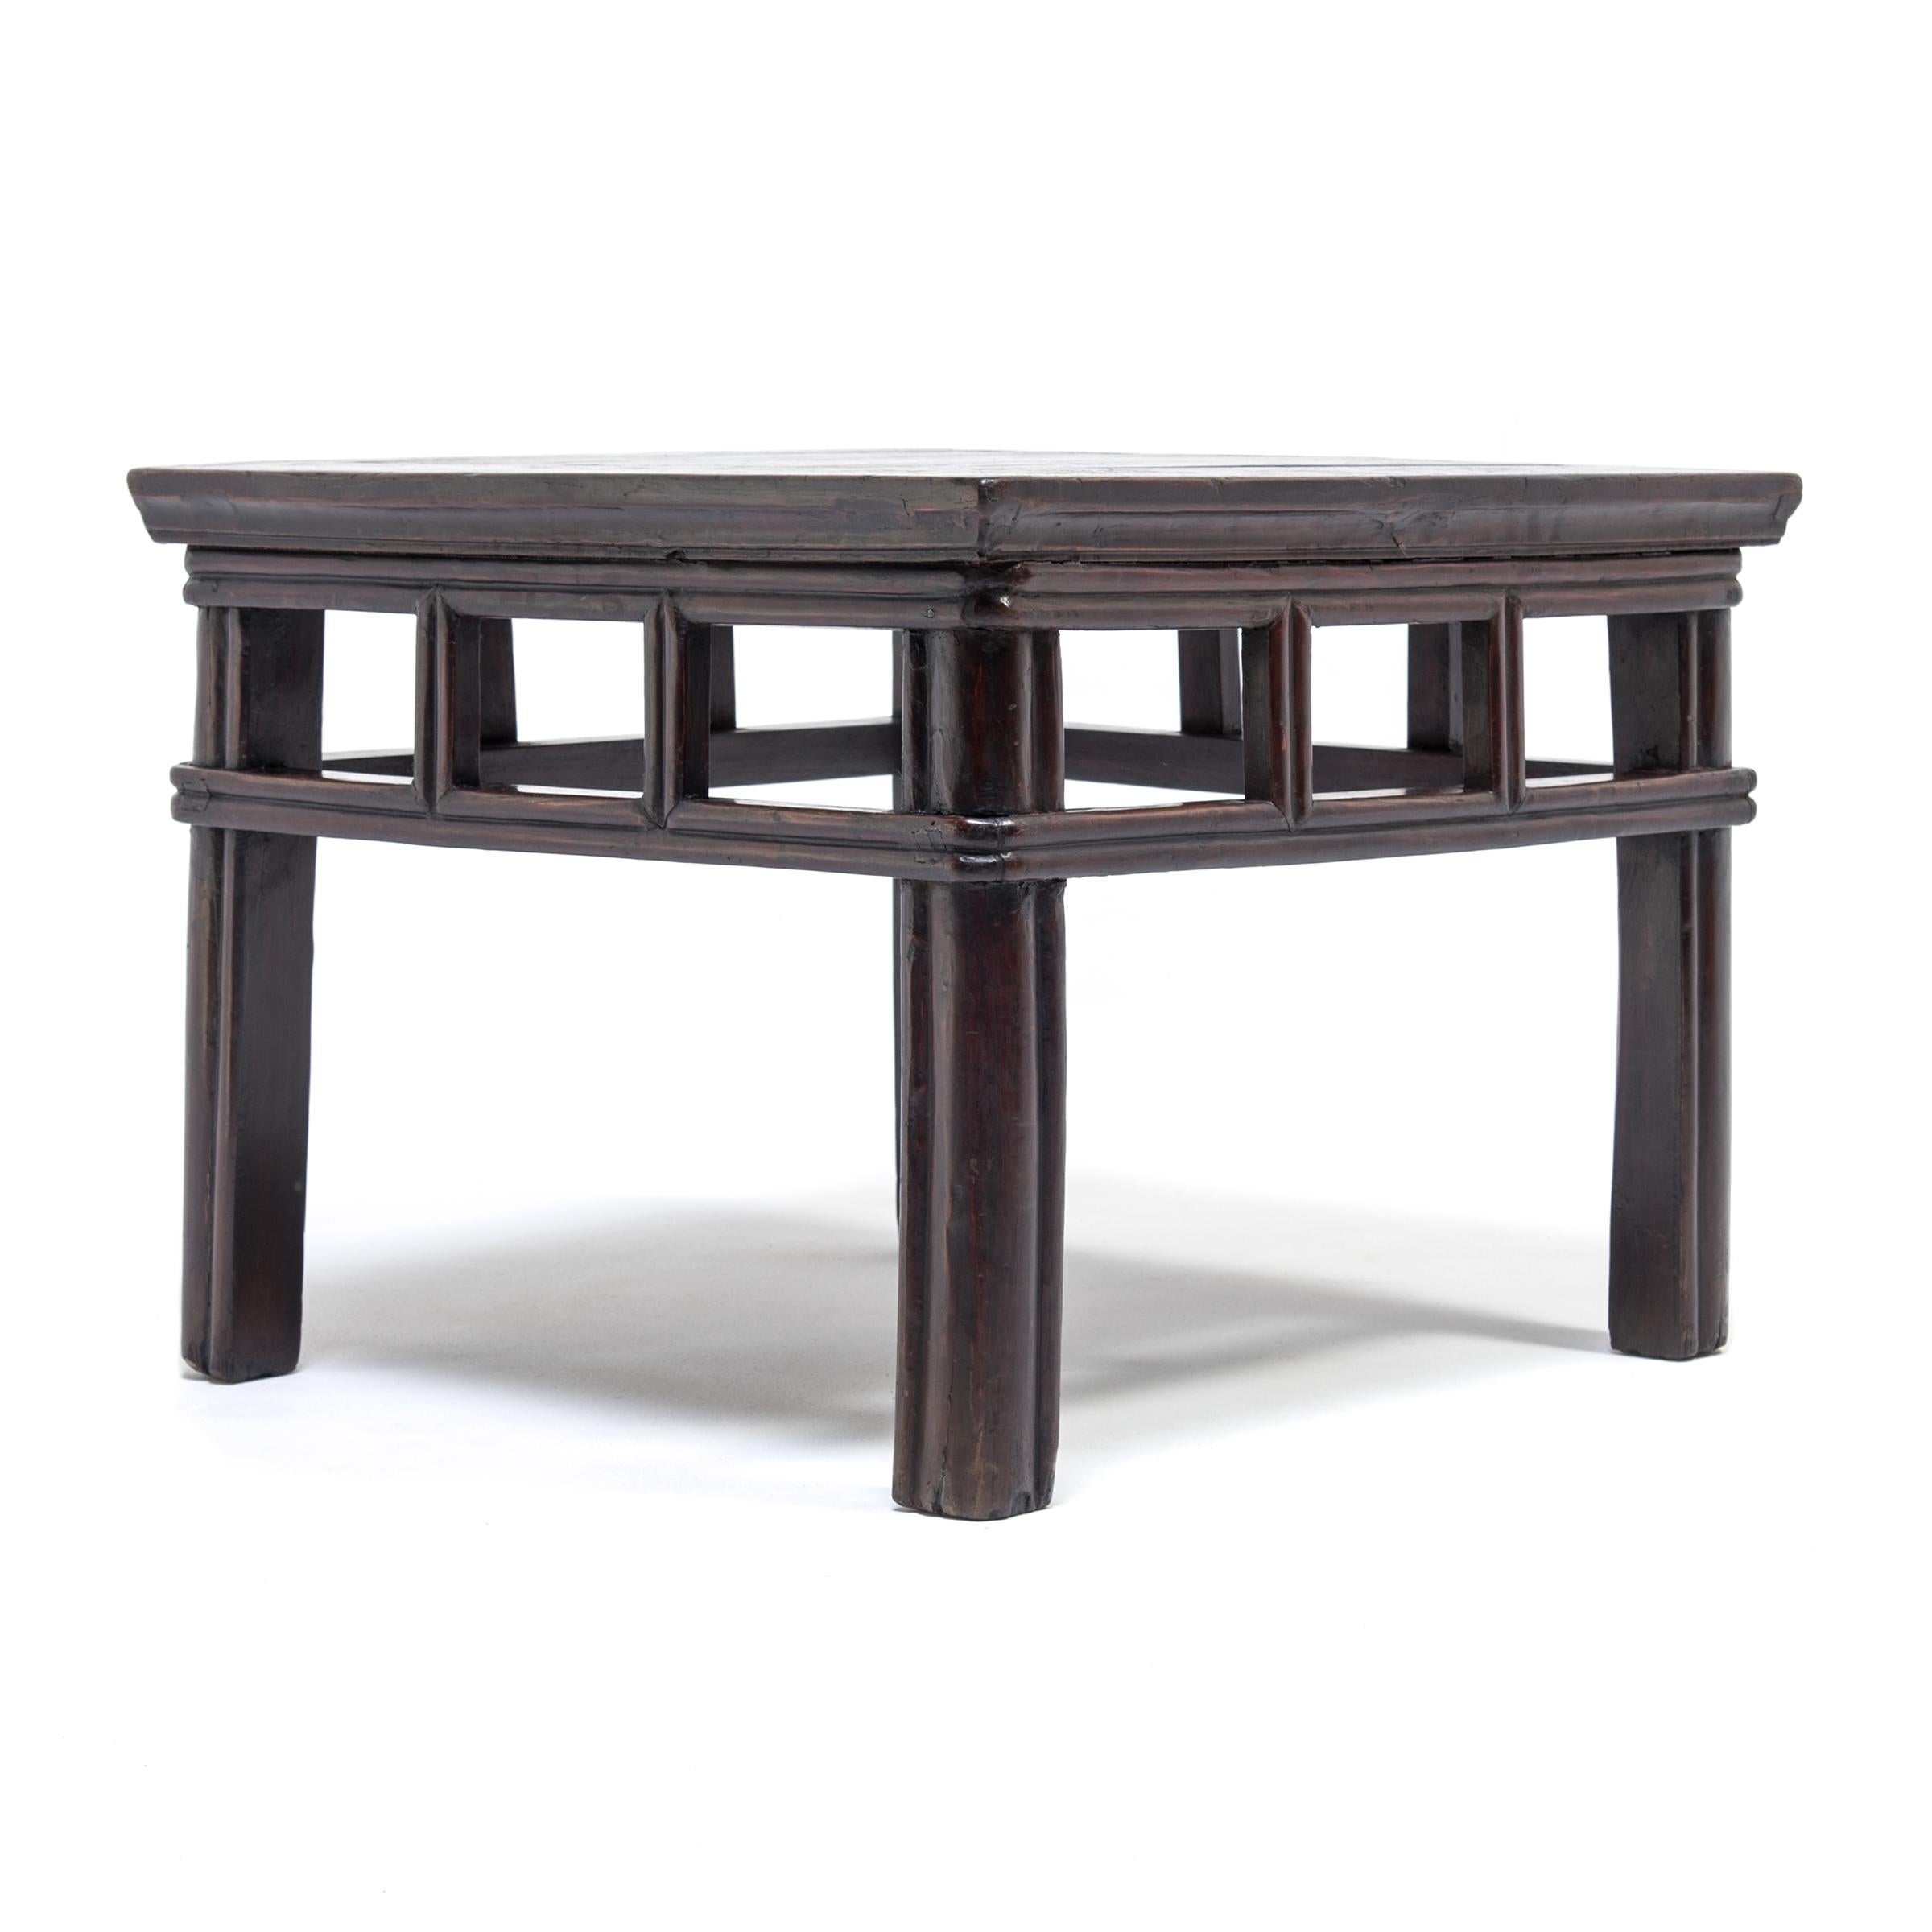 This mid-19th century fang deng (square stool) was made in Hebei province and crafted of elm foraged from the forests of northern China. The stretchers encircling the outer edges of the rounded legs highlight the masterful carpentry employed to